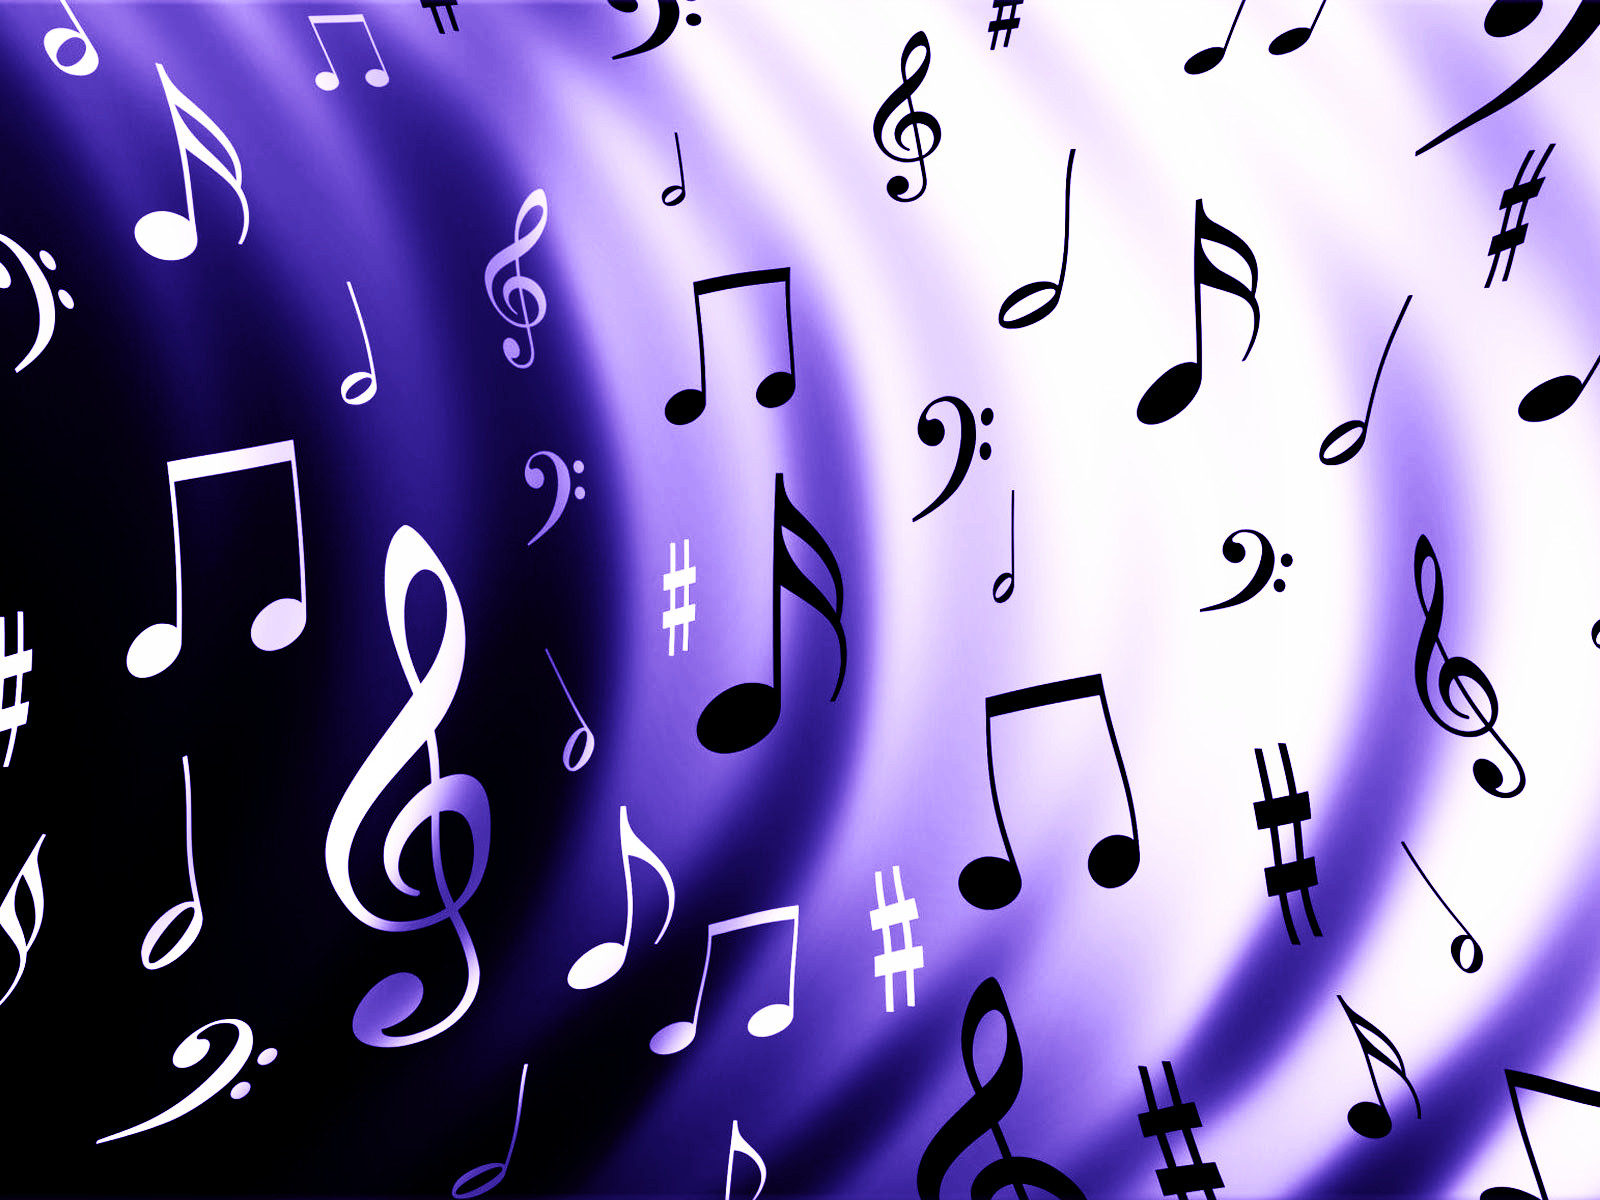 I Love Music Pictures - HD Wallpapers and Pictures